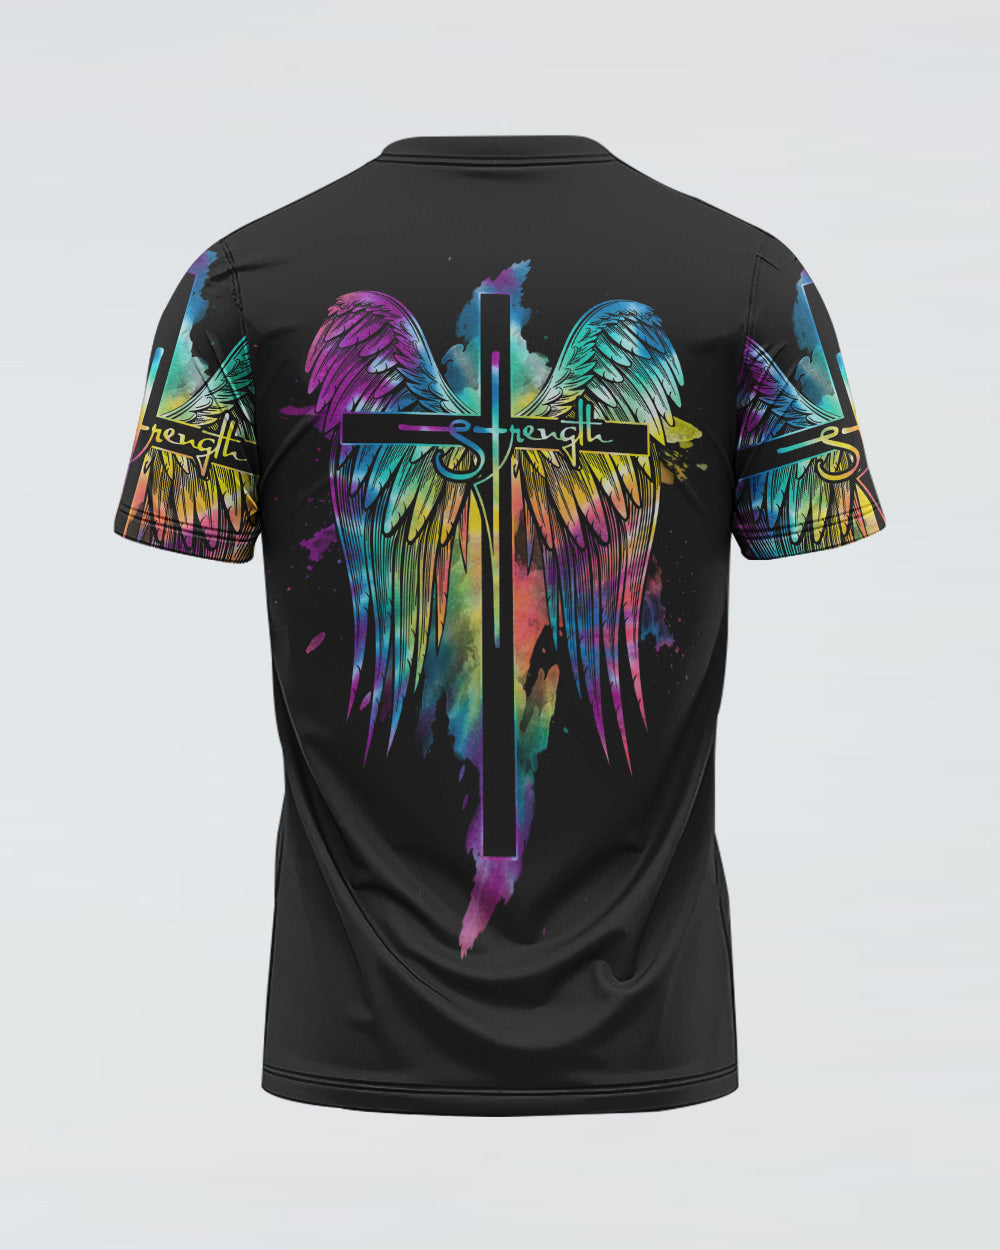 Strength Wings Colorful Watercolor Women's Christian Tshirt